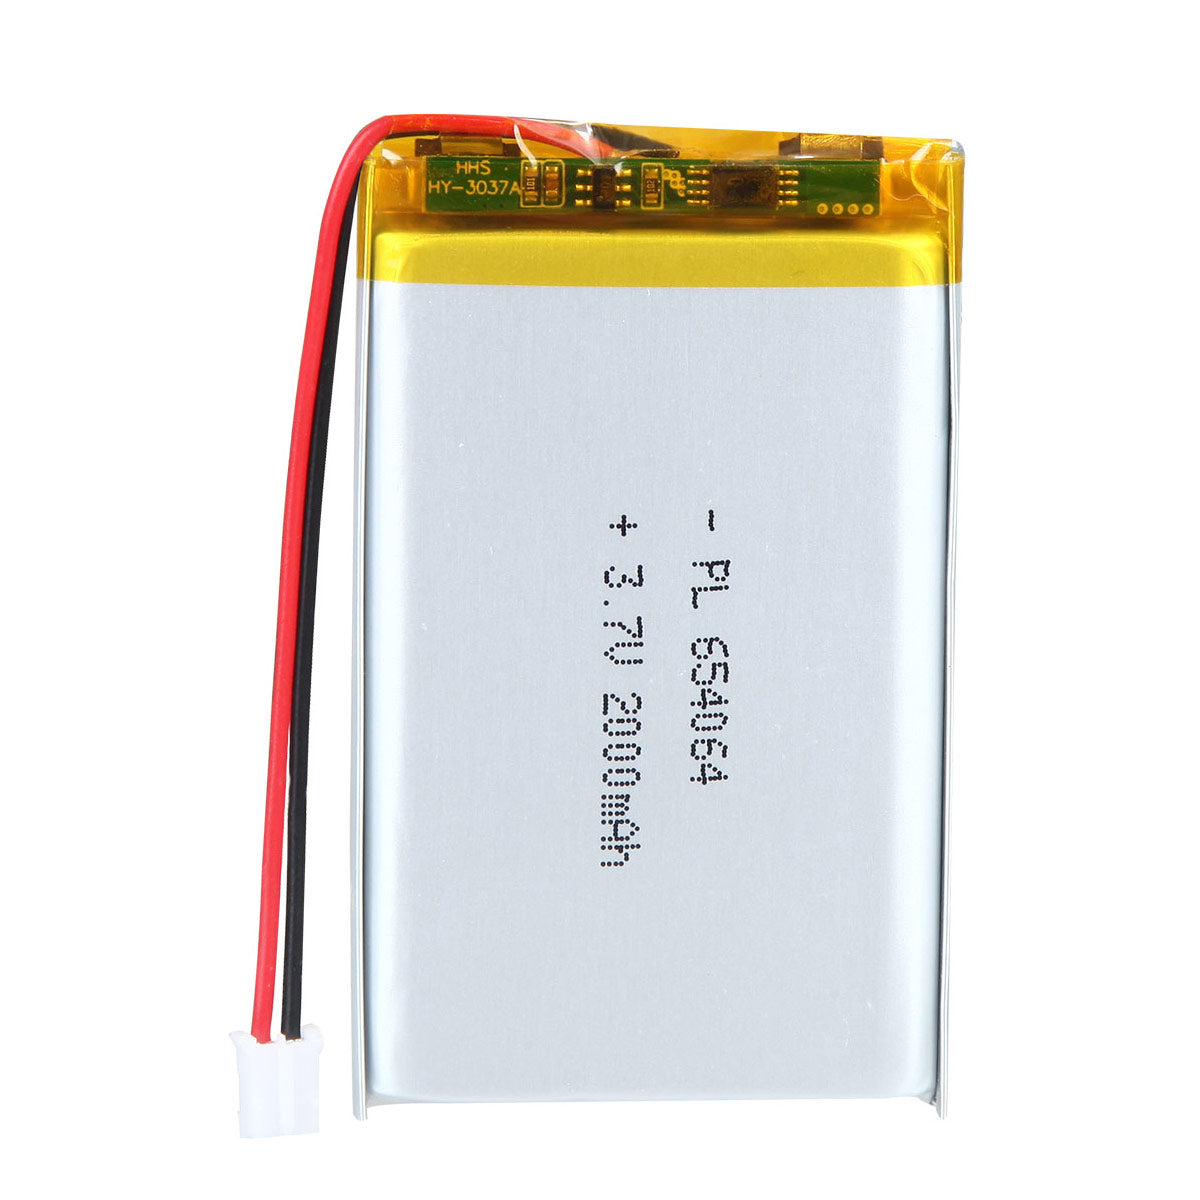 3.7V 2000mAh 654064 Rechargeable Lithium Polymer Battery